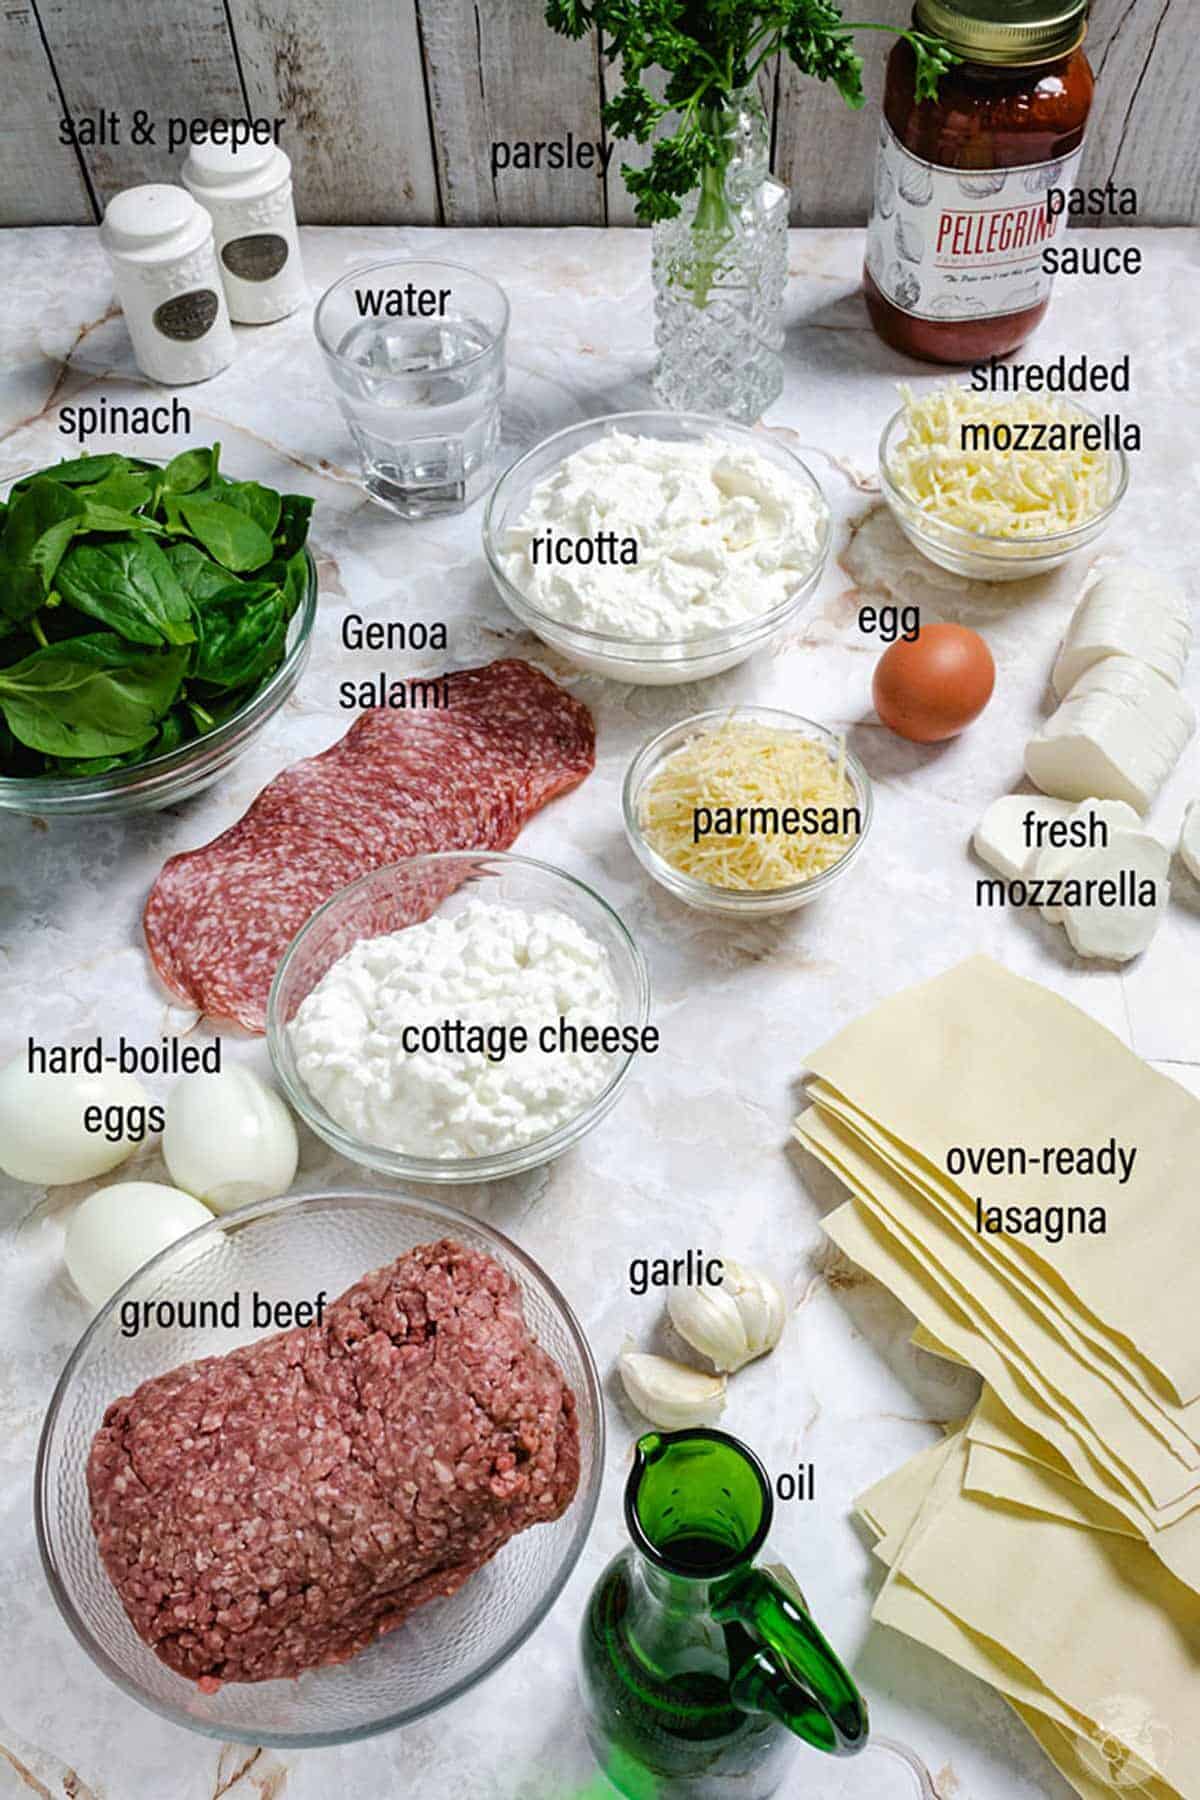 Ingredients for Sicilian lasagna on the table.